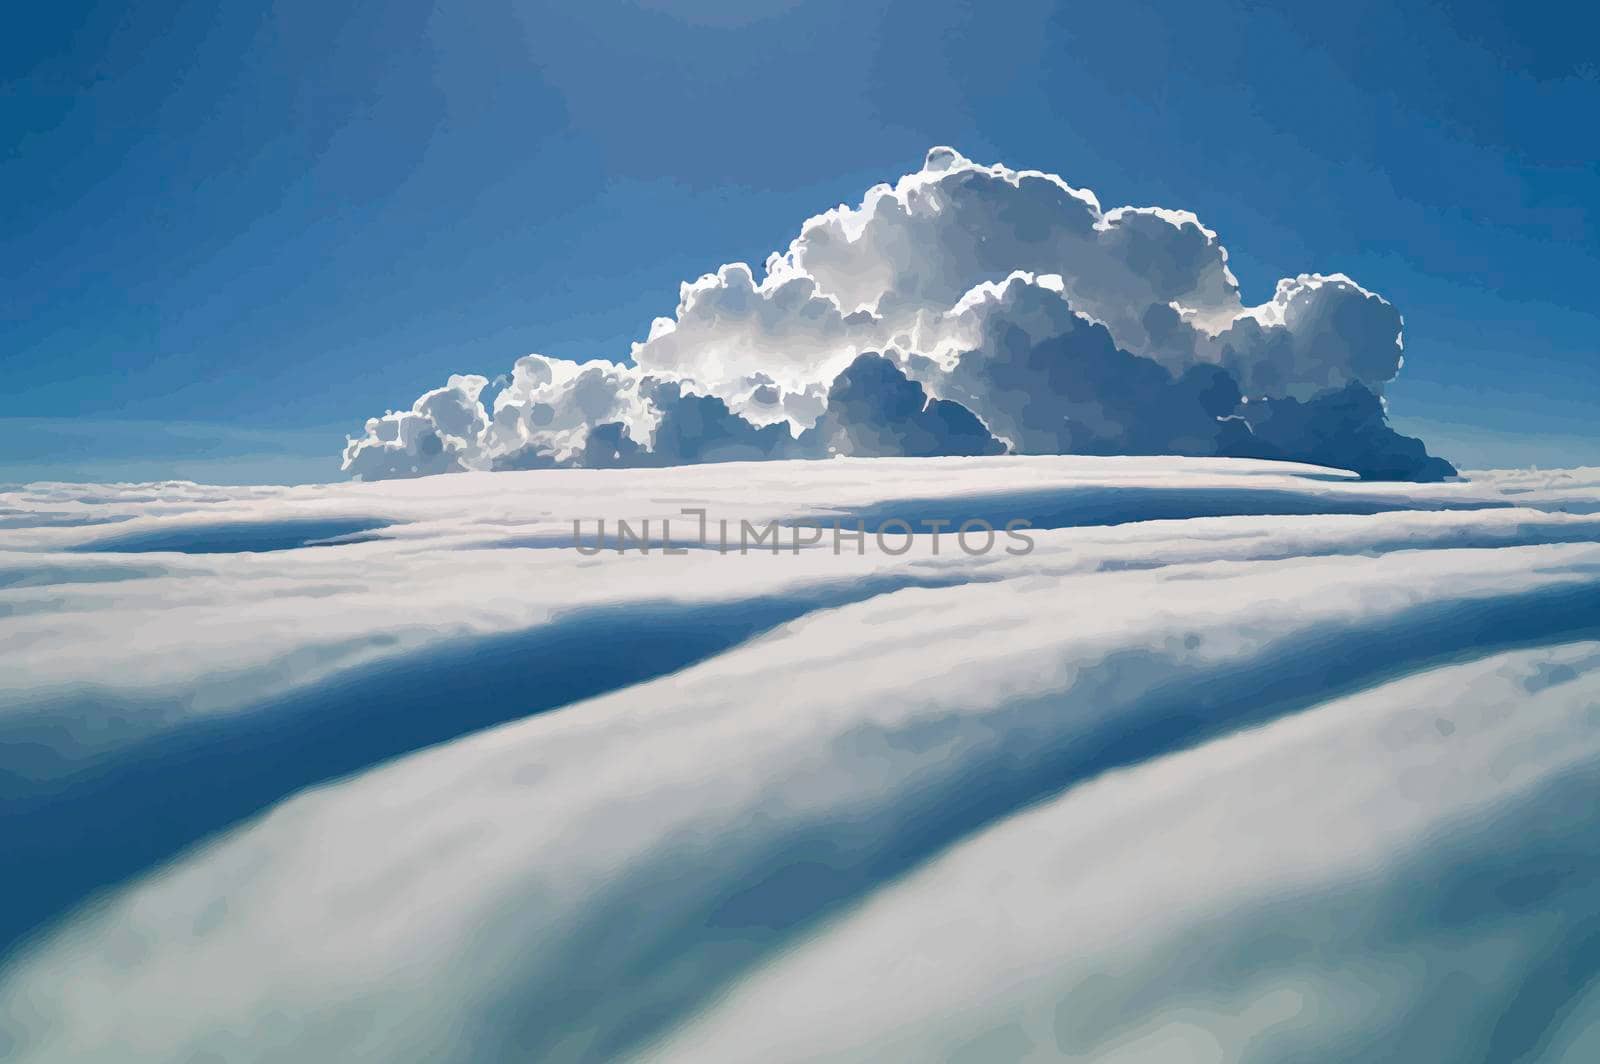 Illustration of the amazing sky with clouds. reflection of sunlight coming out of clouds. Beautiful sky and clouds.